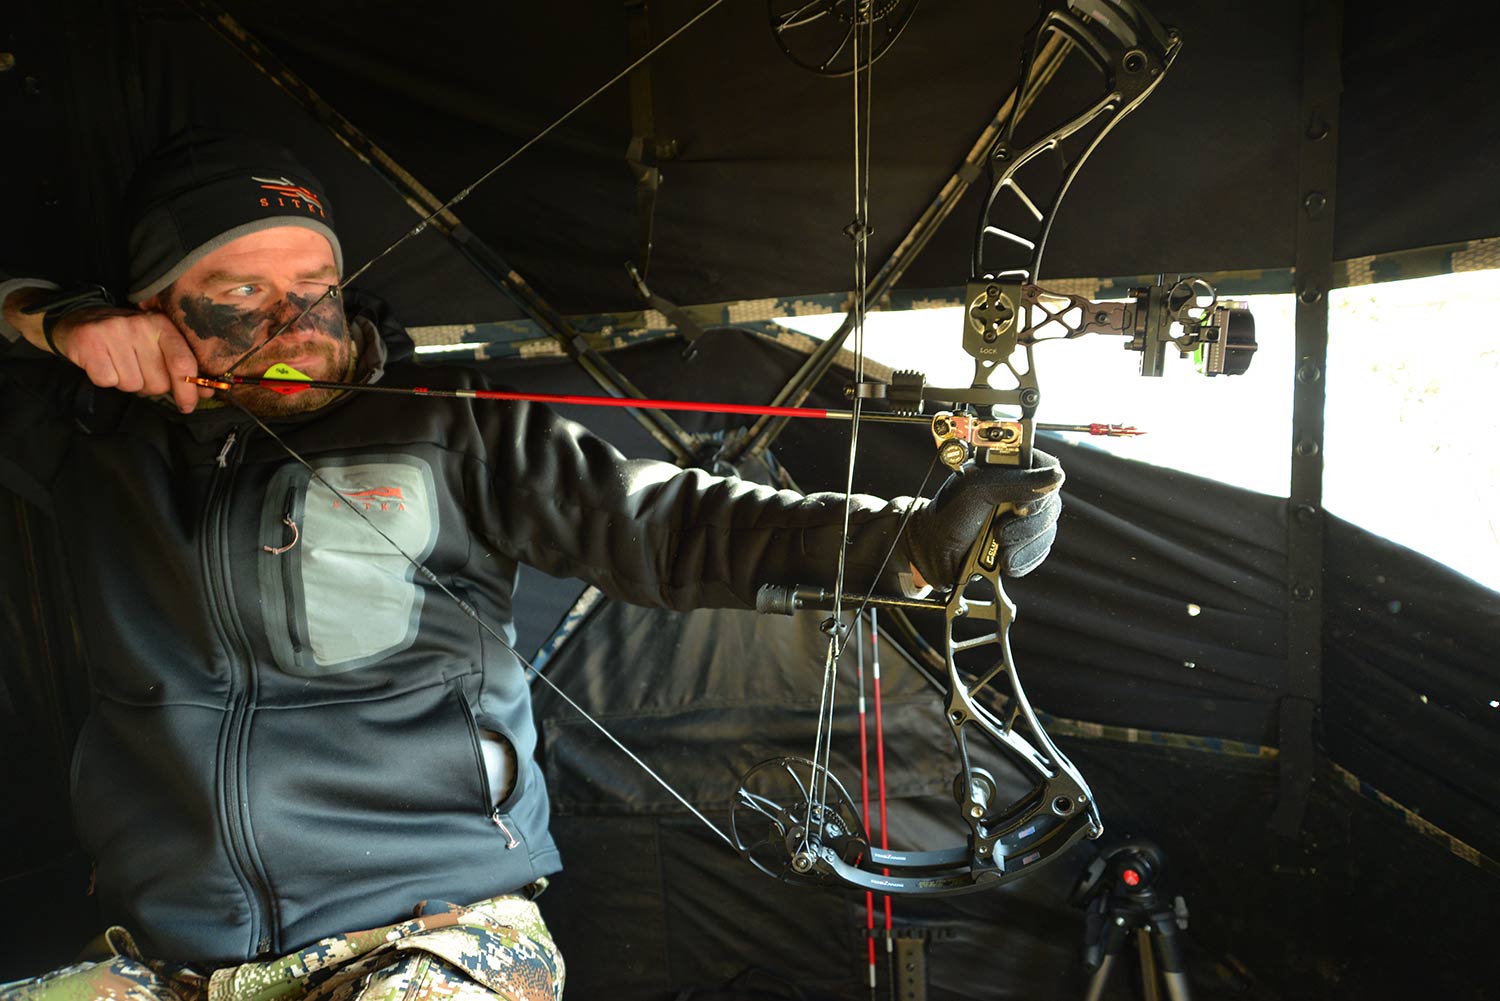 A bowhunter pulling back on a compound bow.